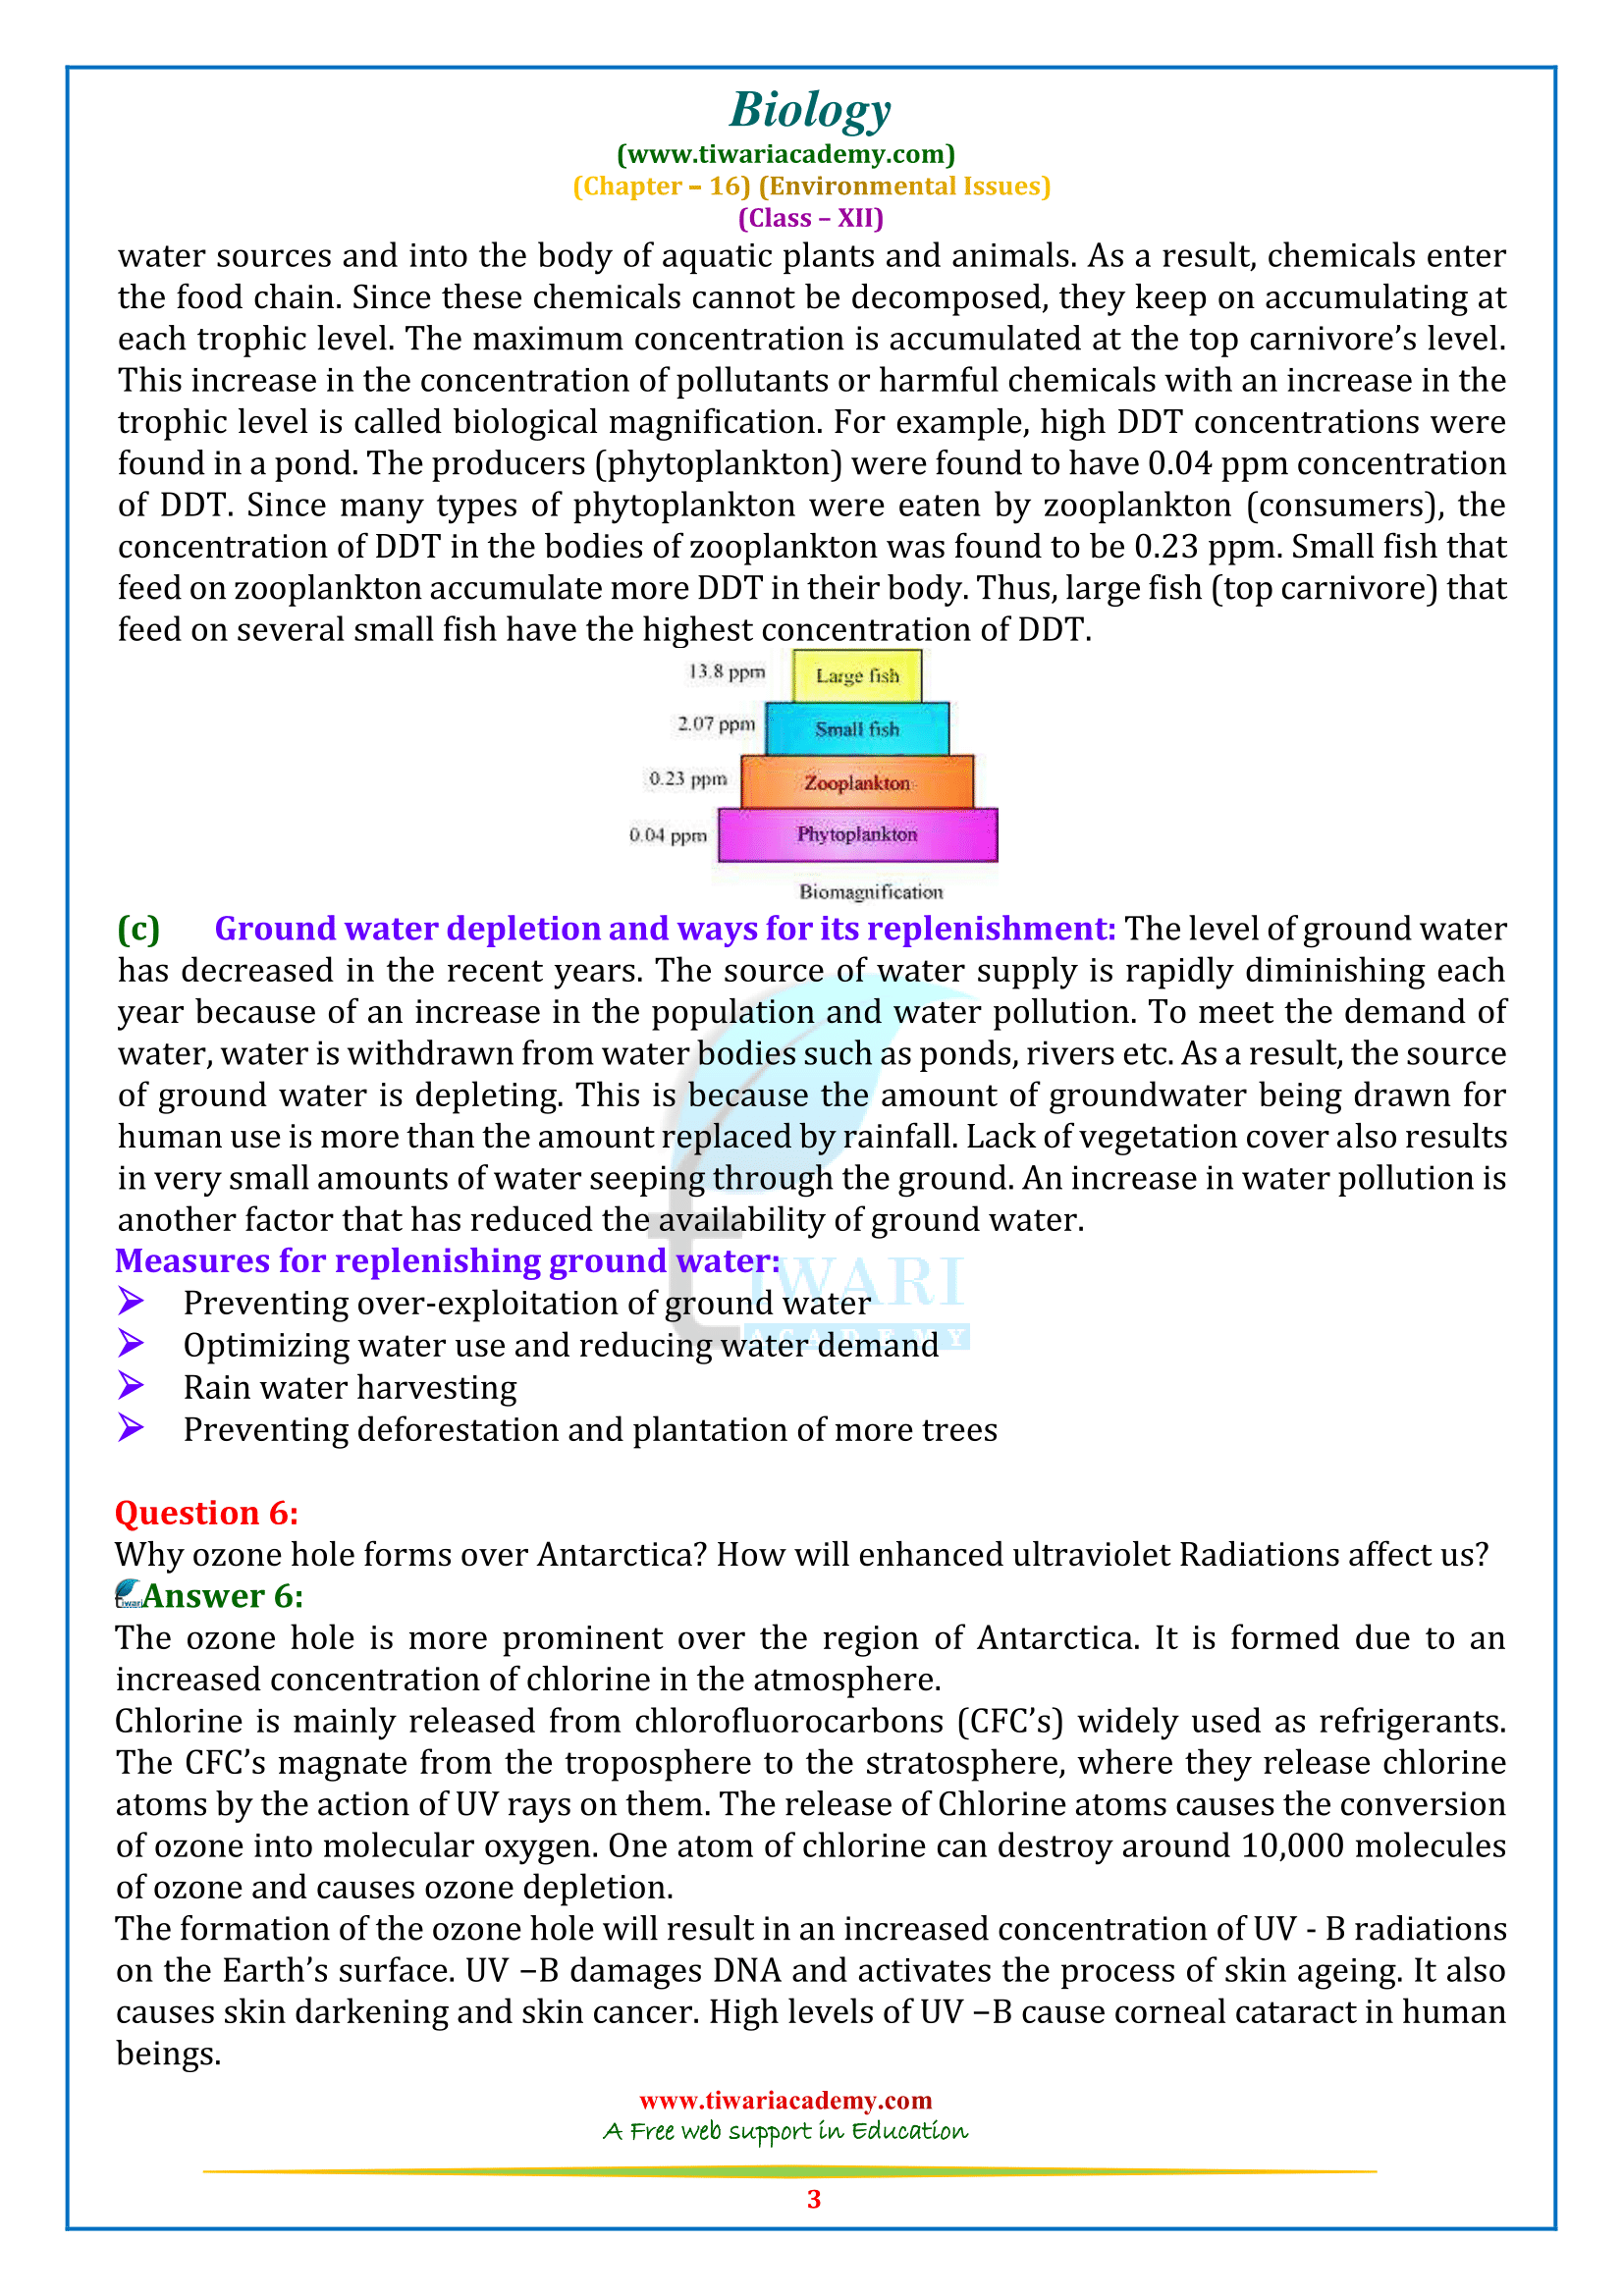 NCERT Solutions for Class 12 Biology Chapter 16 in English Medium